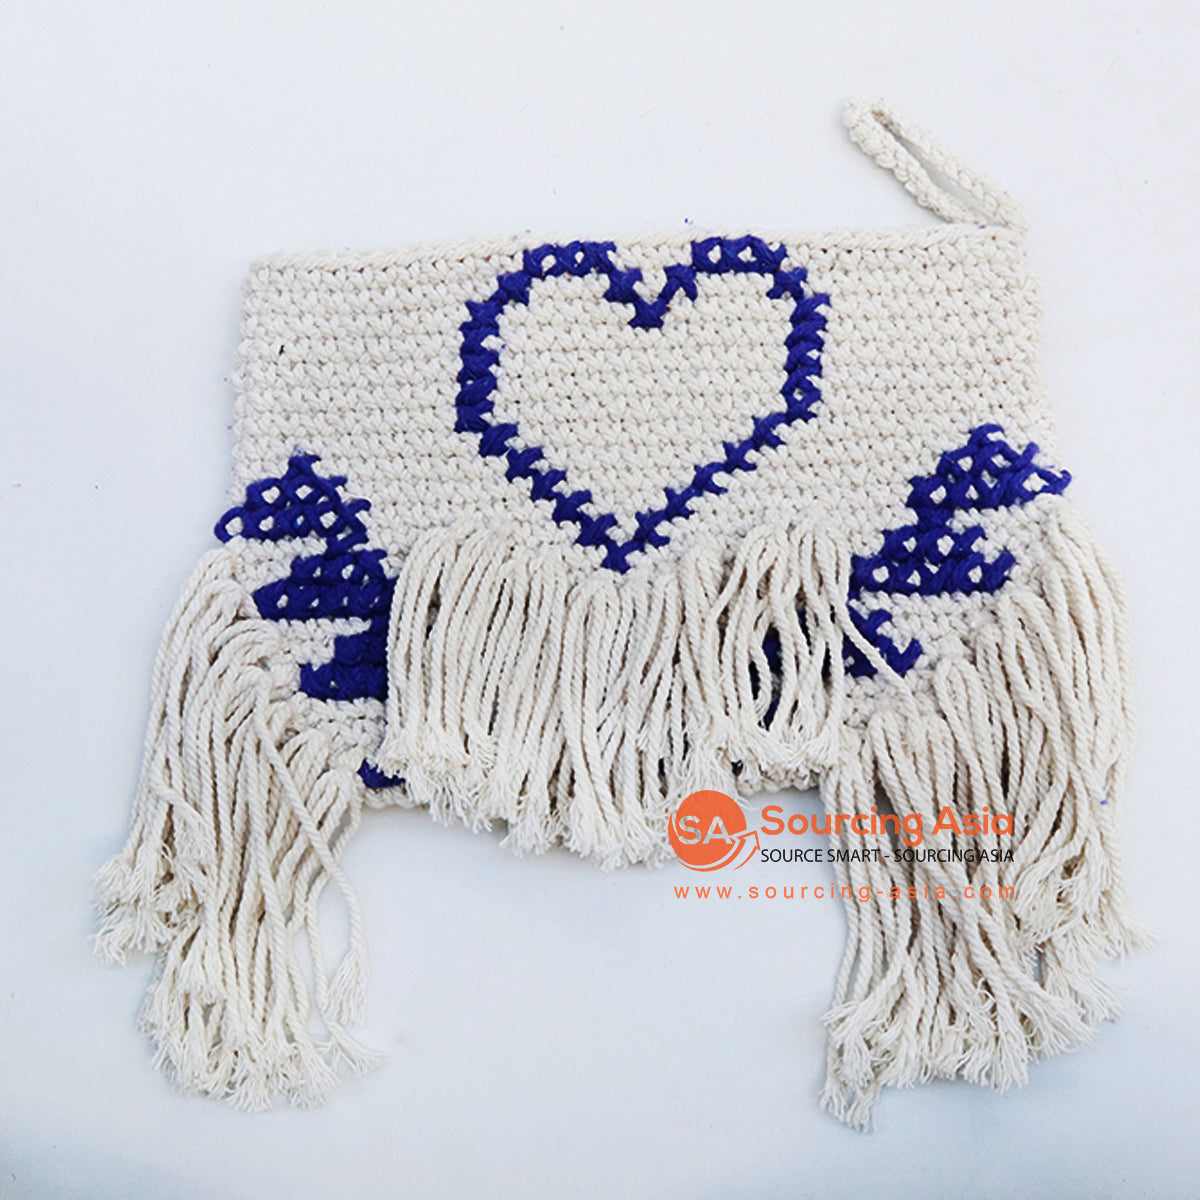 EXAC008 WHITE MACRAME AND BLUE BEADS PATTERNED PURSE